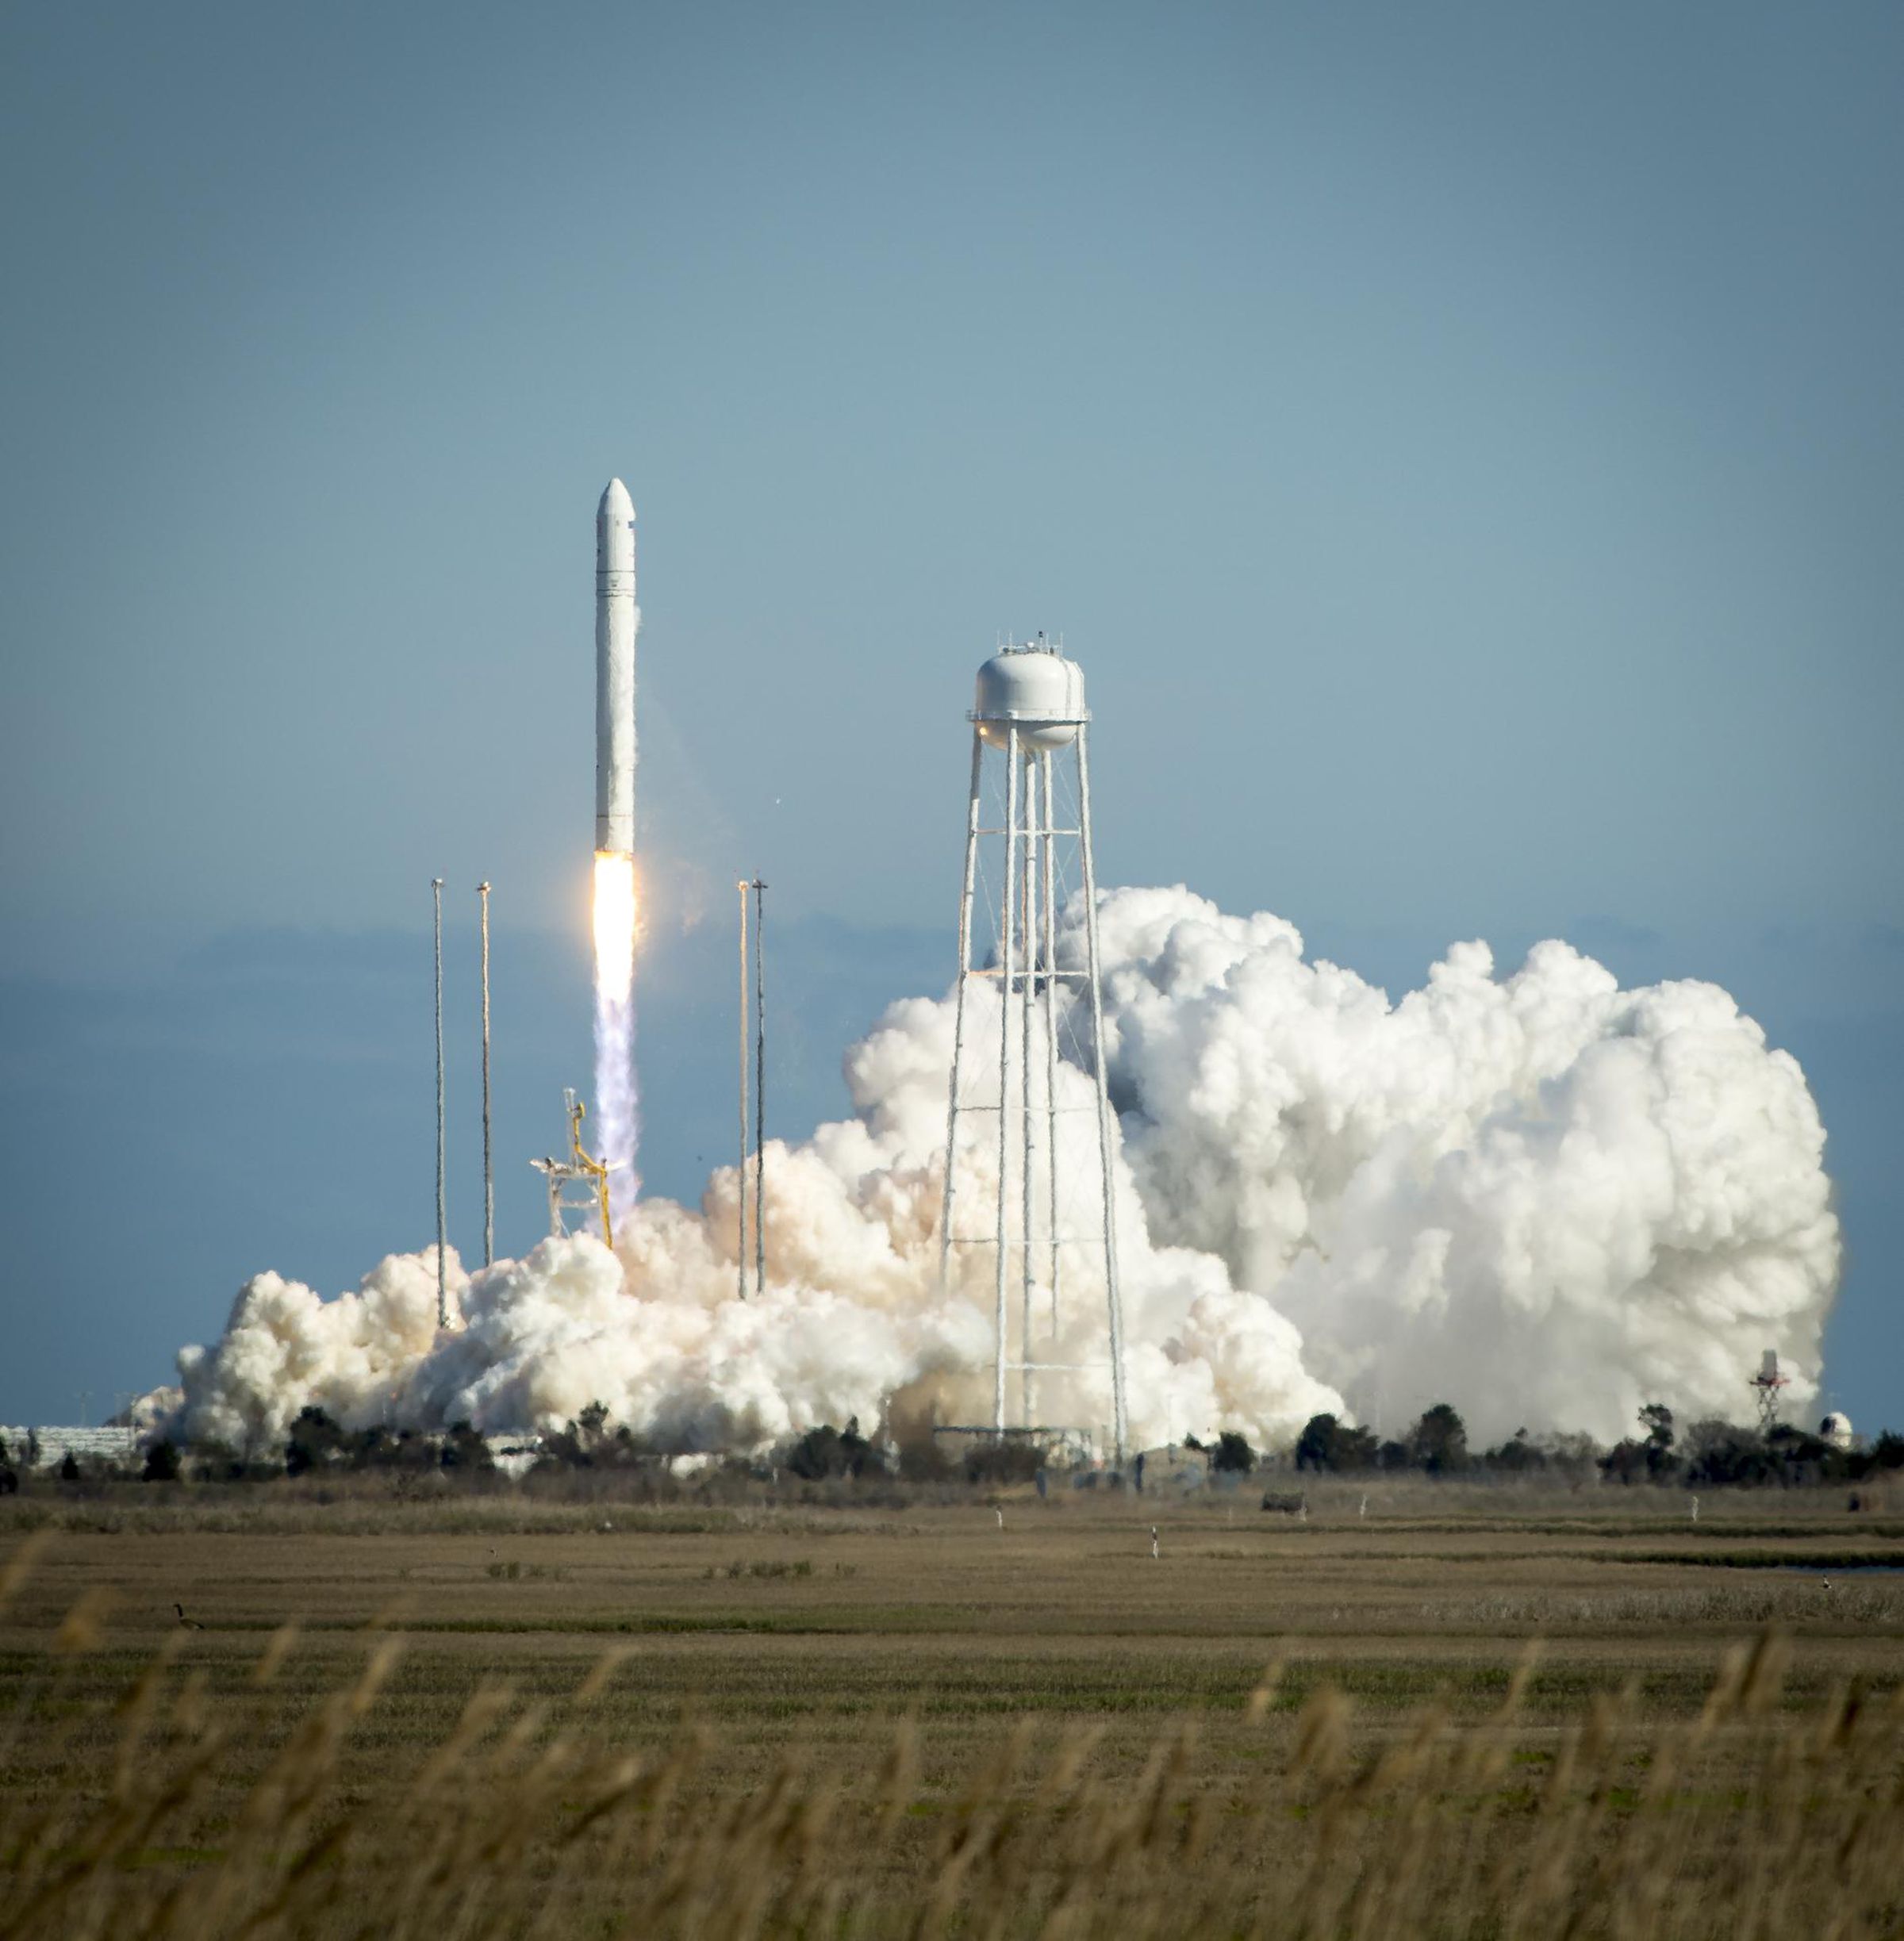 An Antares rocket taking off from Wallops in Virginia.